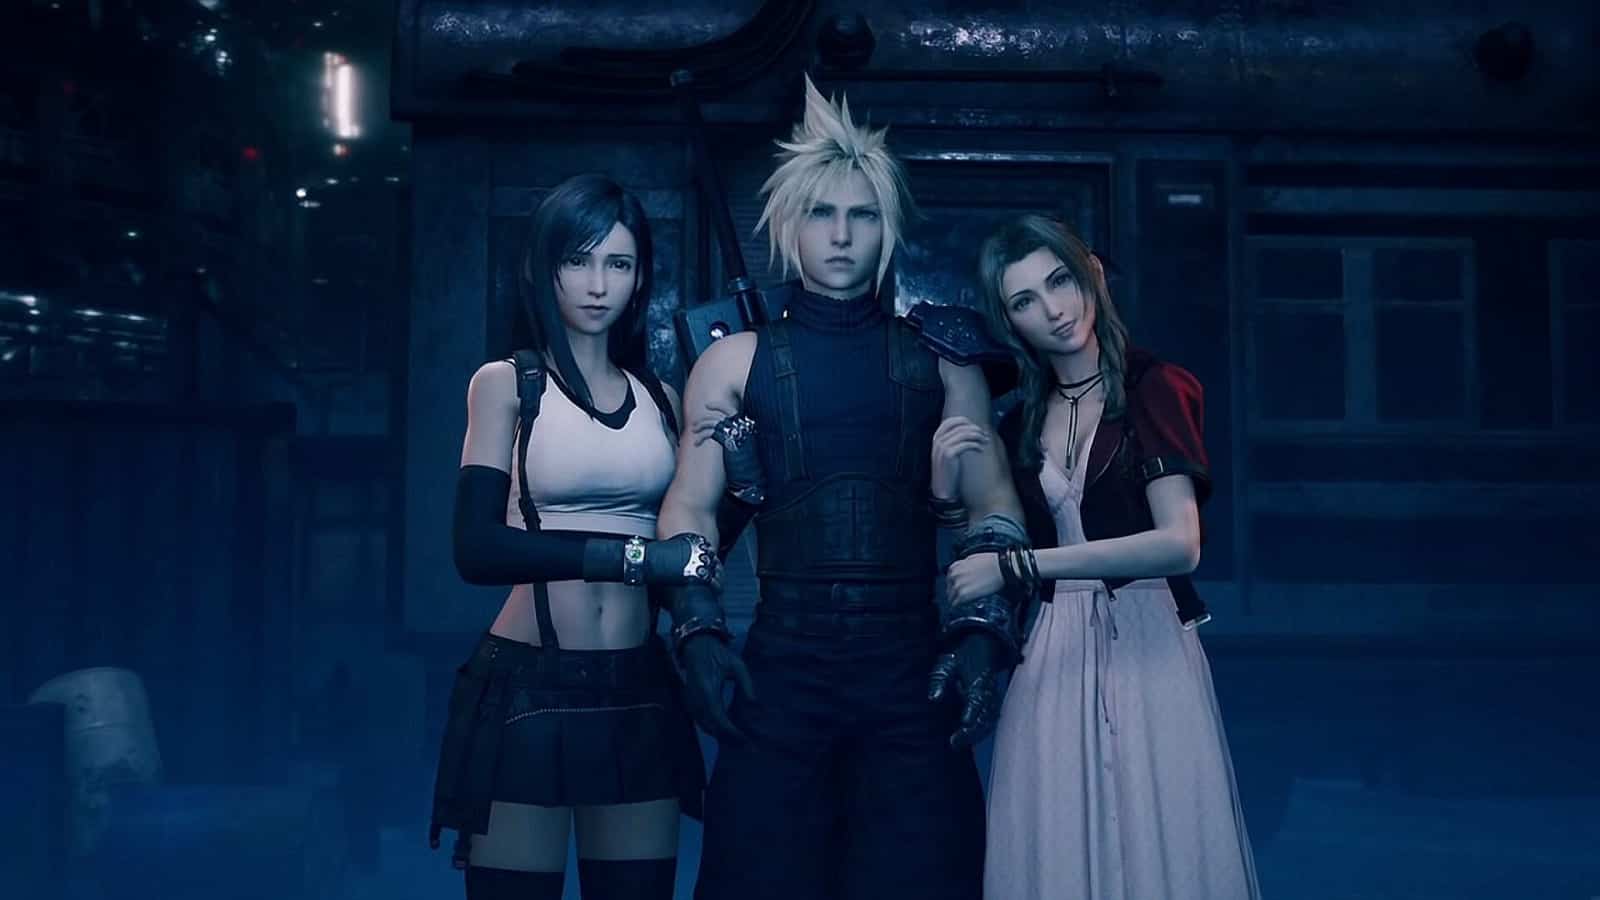 ff7 remake steam version release incoming